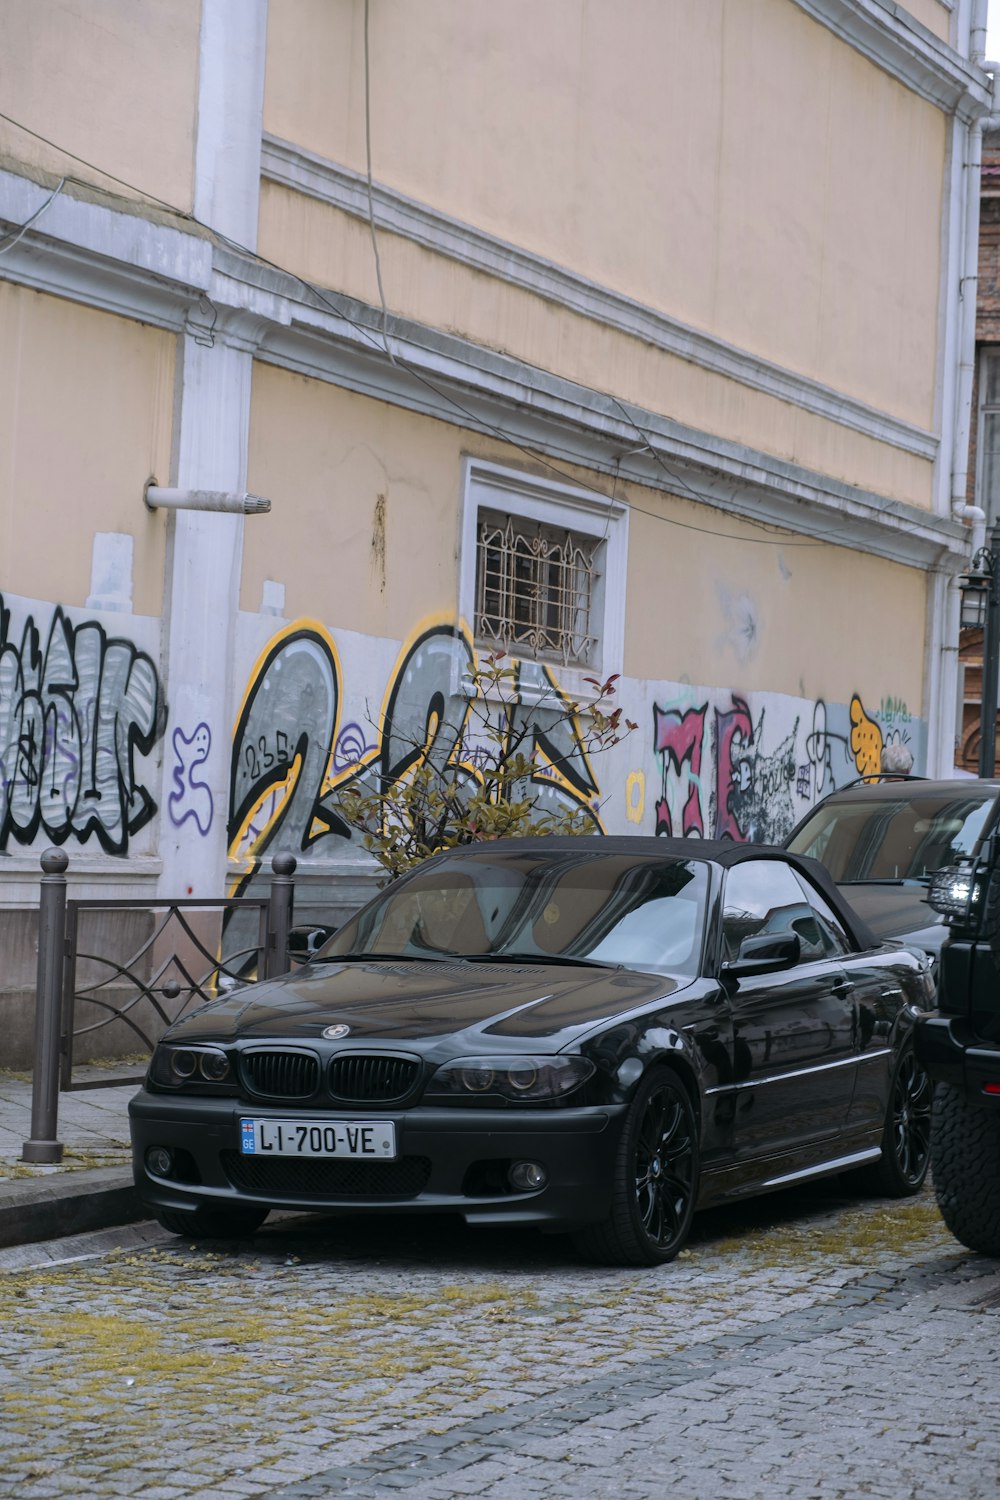 a black car parked in front of a building with graffiti on it